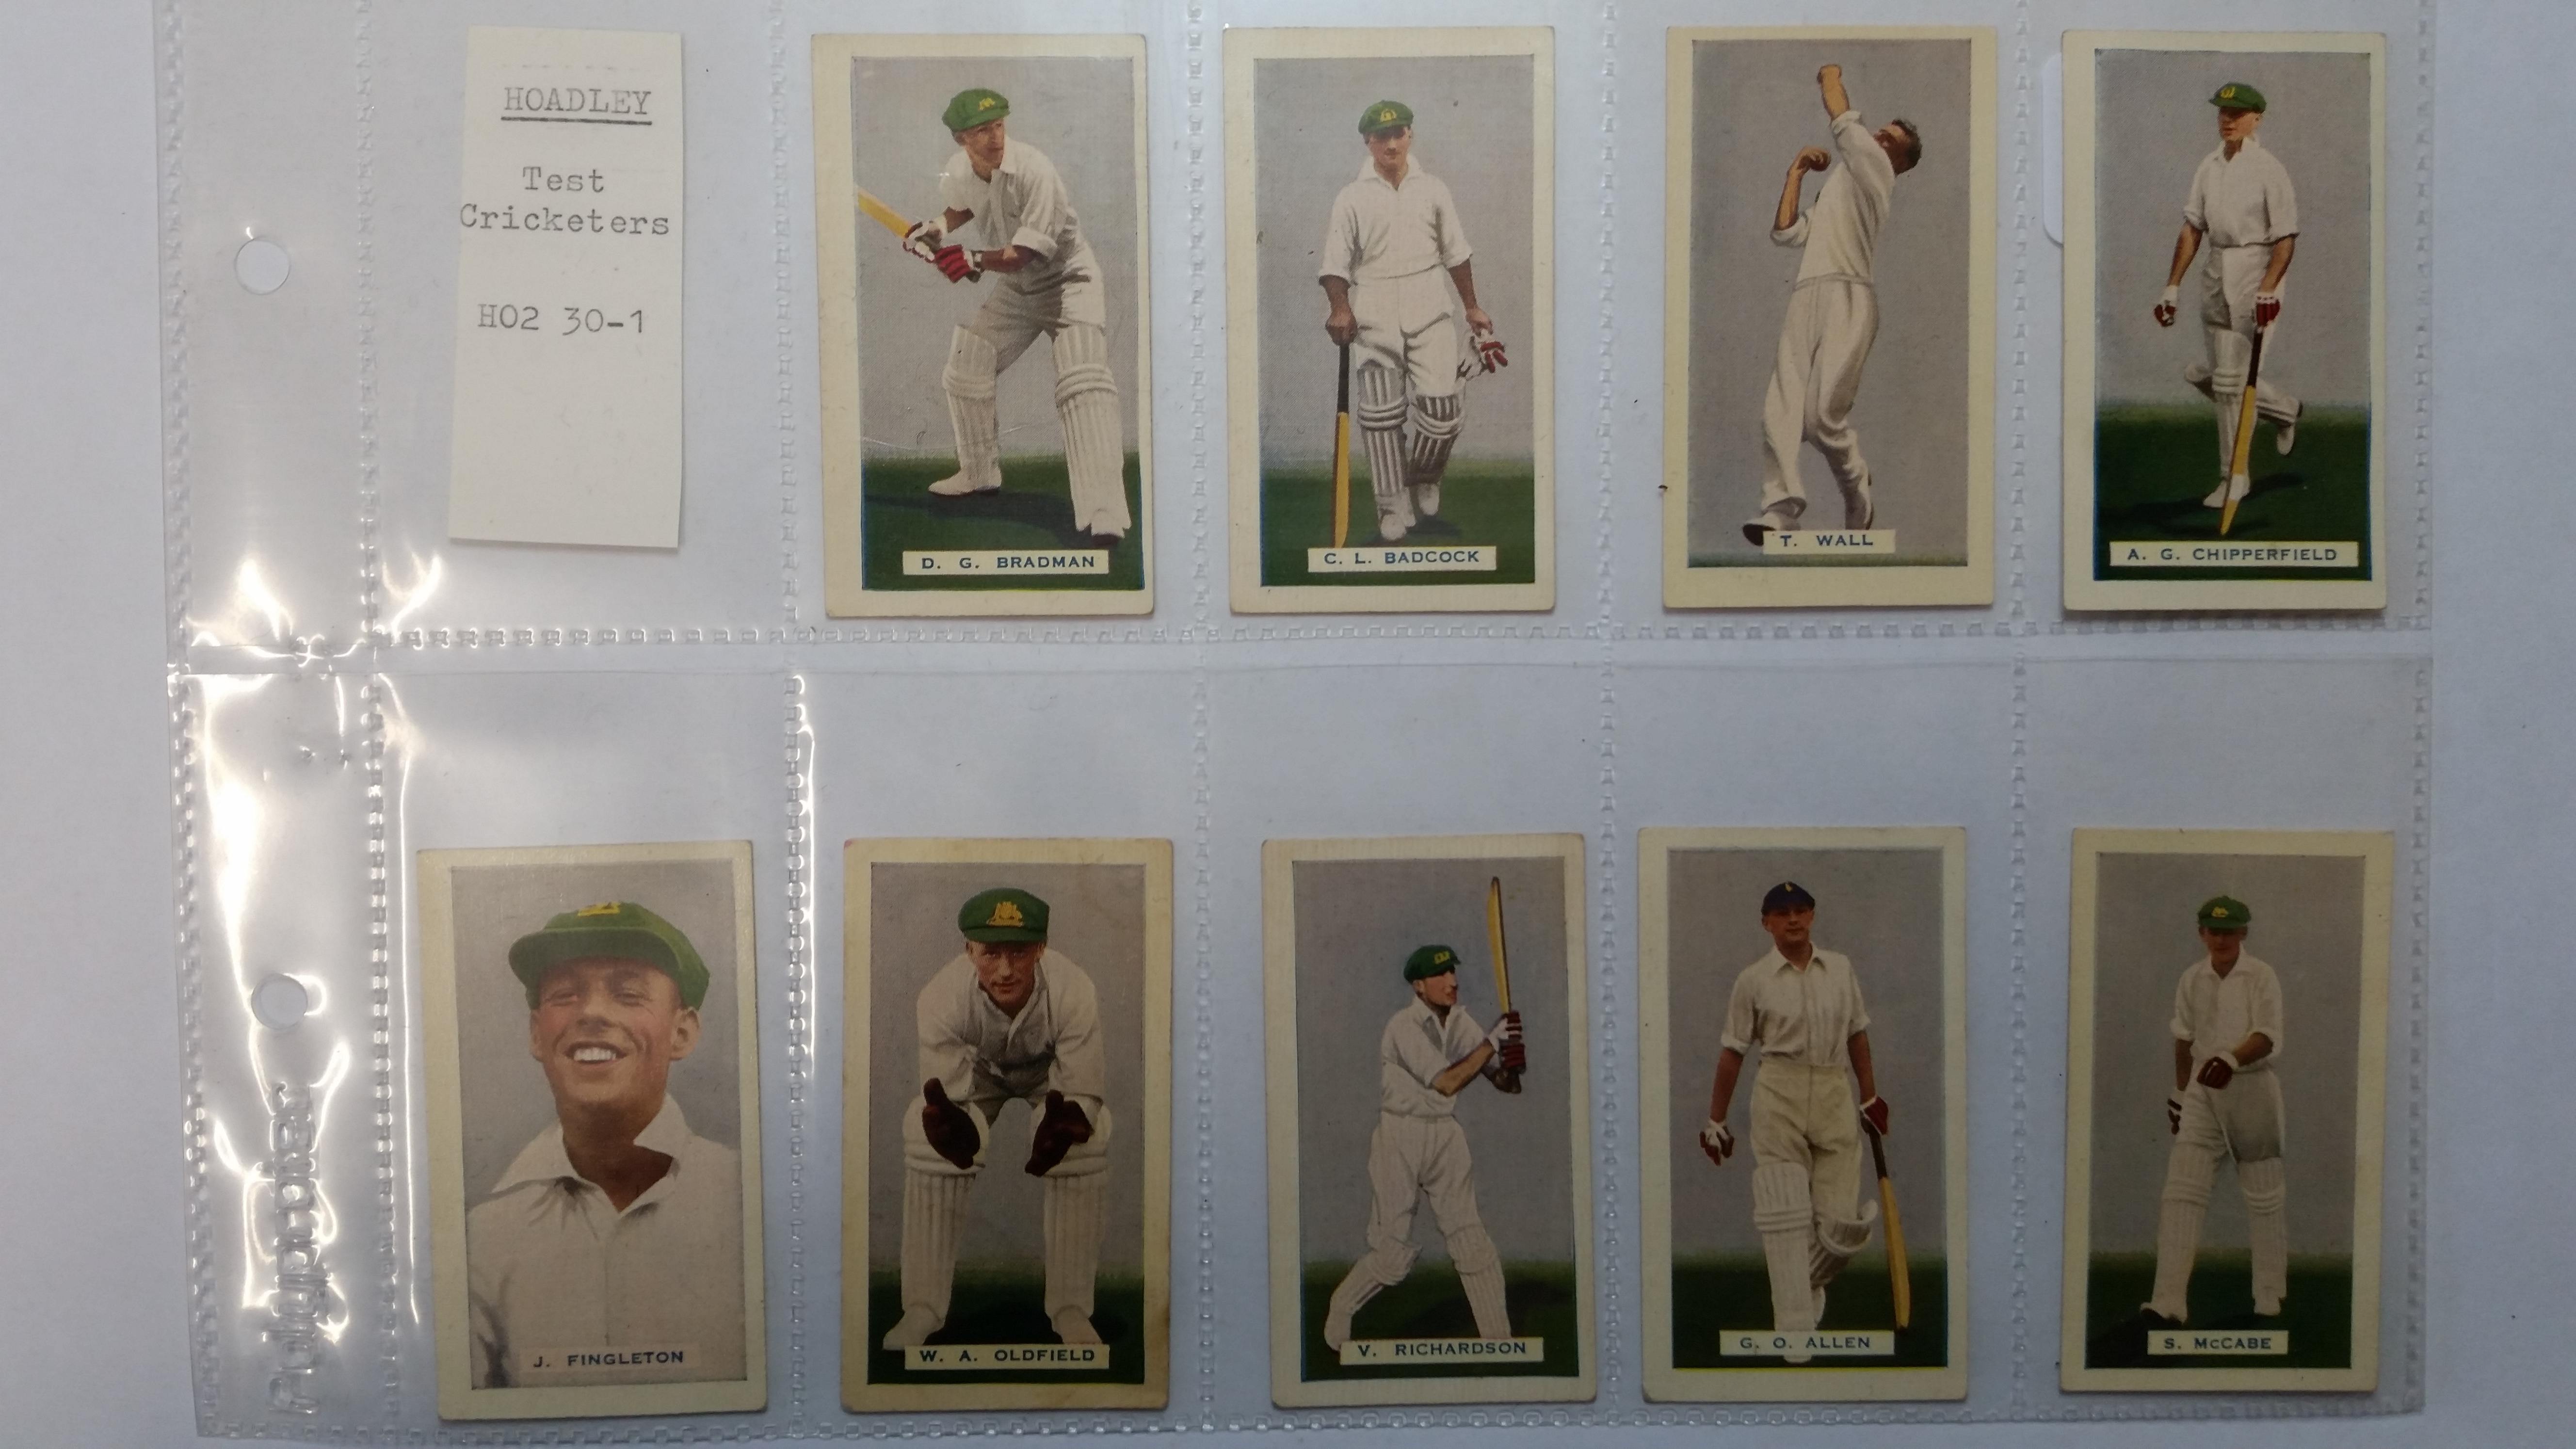 HOADLEY, Test Cricketers (1938), complete, corner clipped (1), creased (3), some corner knocks, P ( - Image 2 of 11